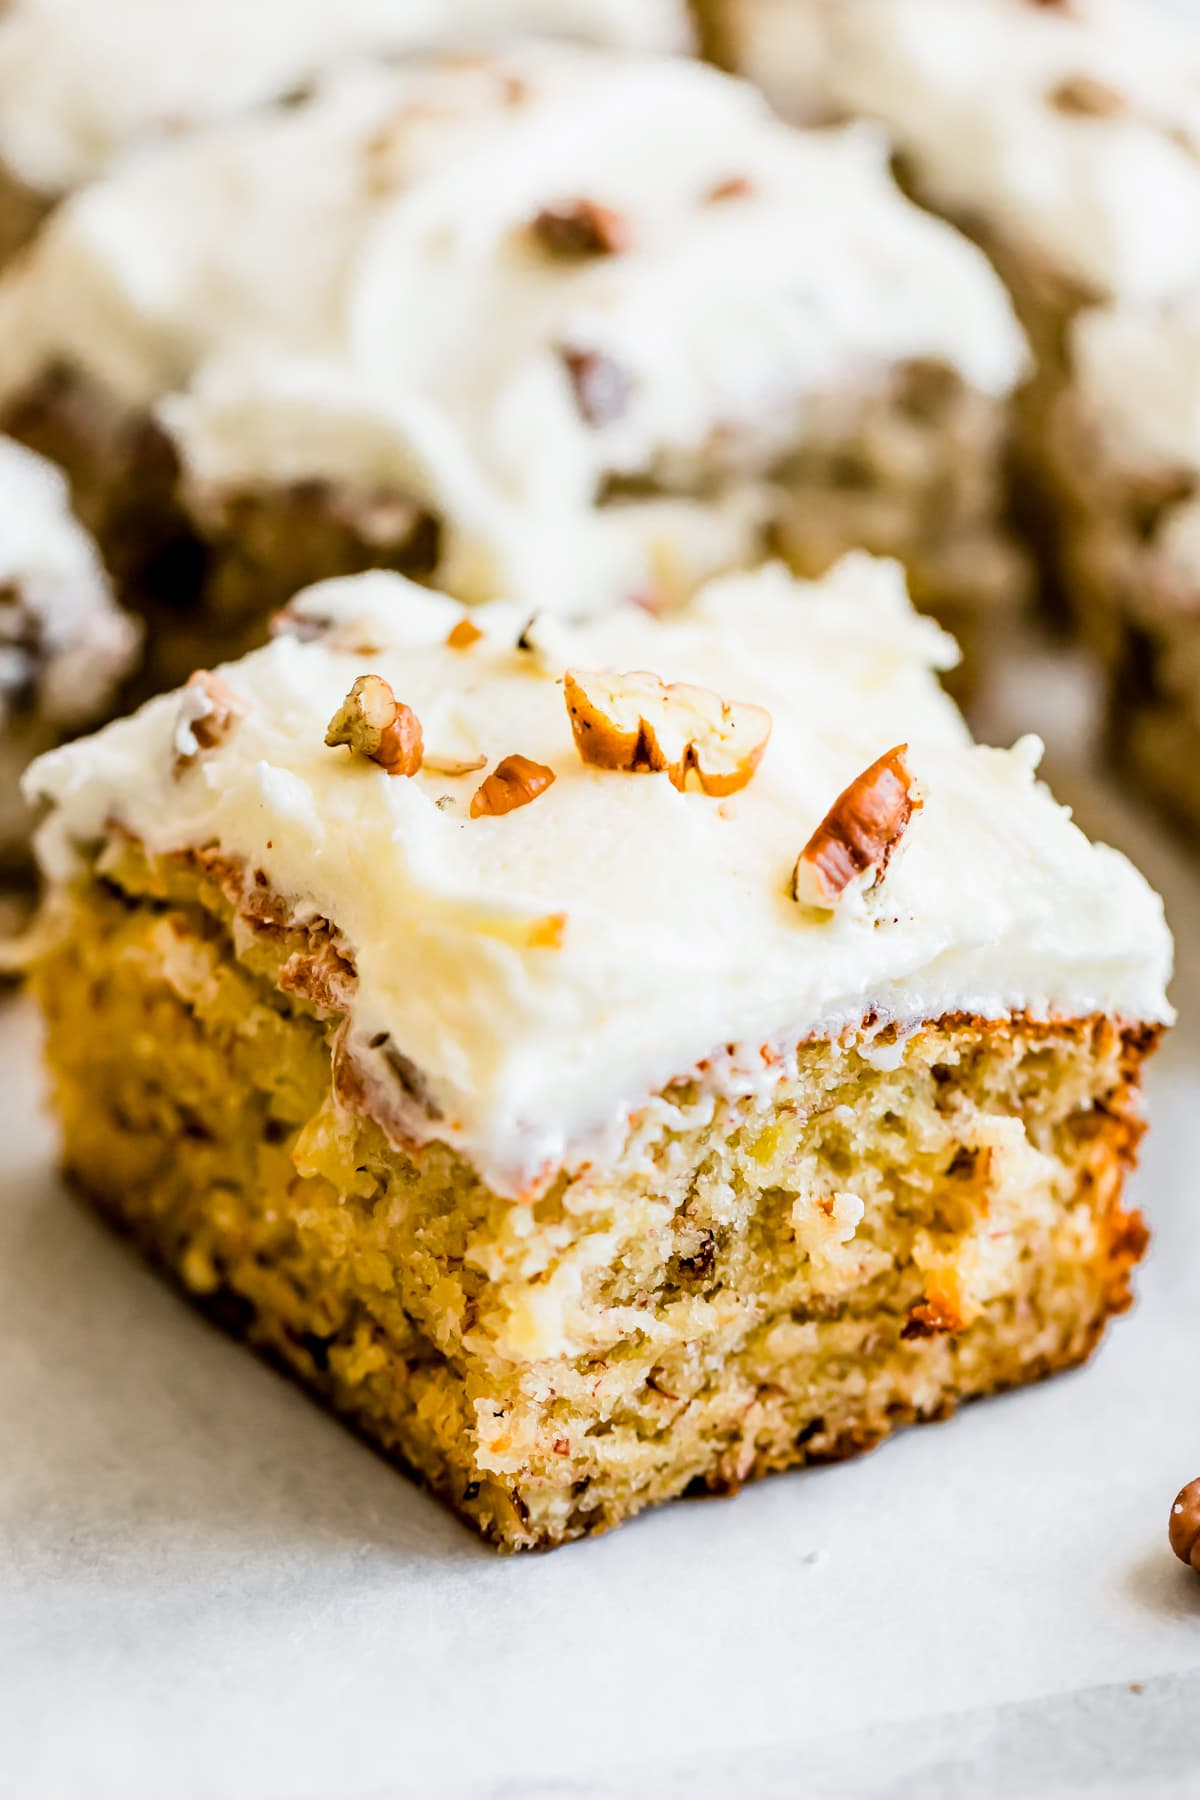 A square of banana cake frosted with cream cheese and topped with chopped pecans.